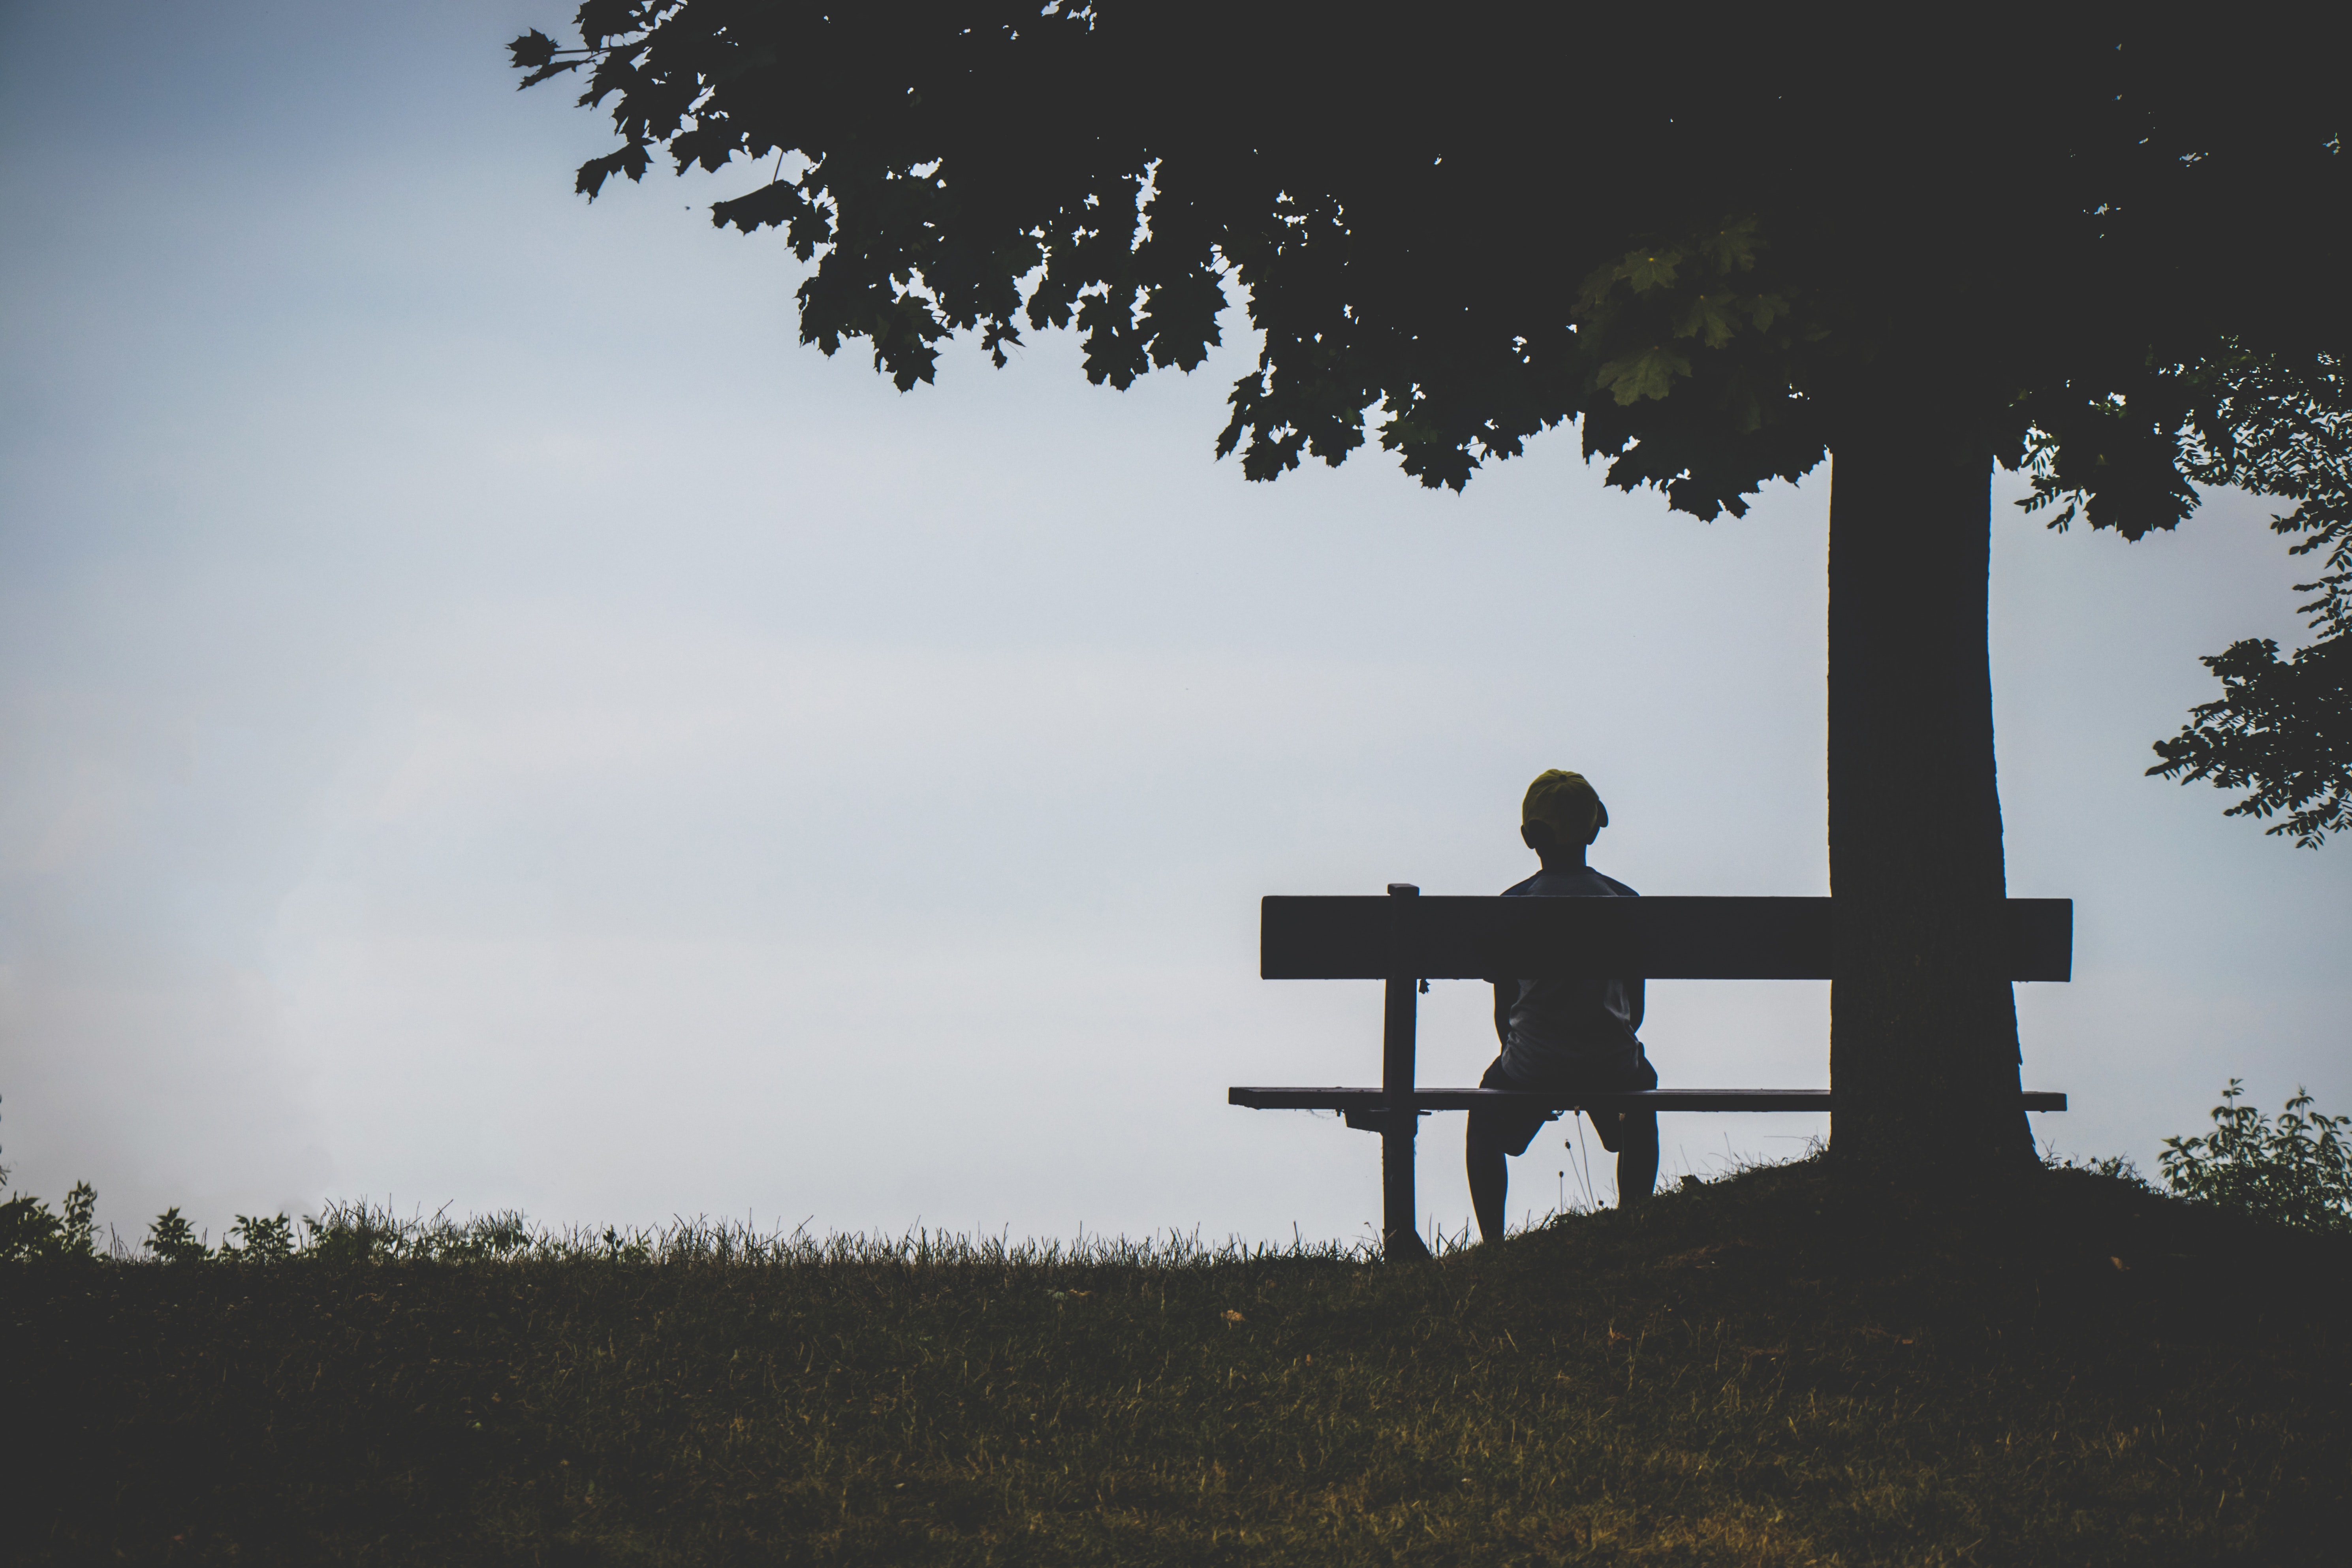 alone, privacy, loneliness, silhouette, seclusion, miscellanea, miscellaneous, bench, lonely, child